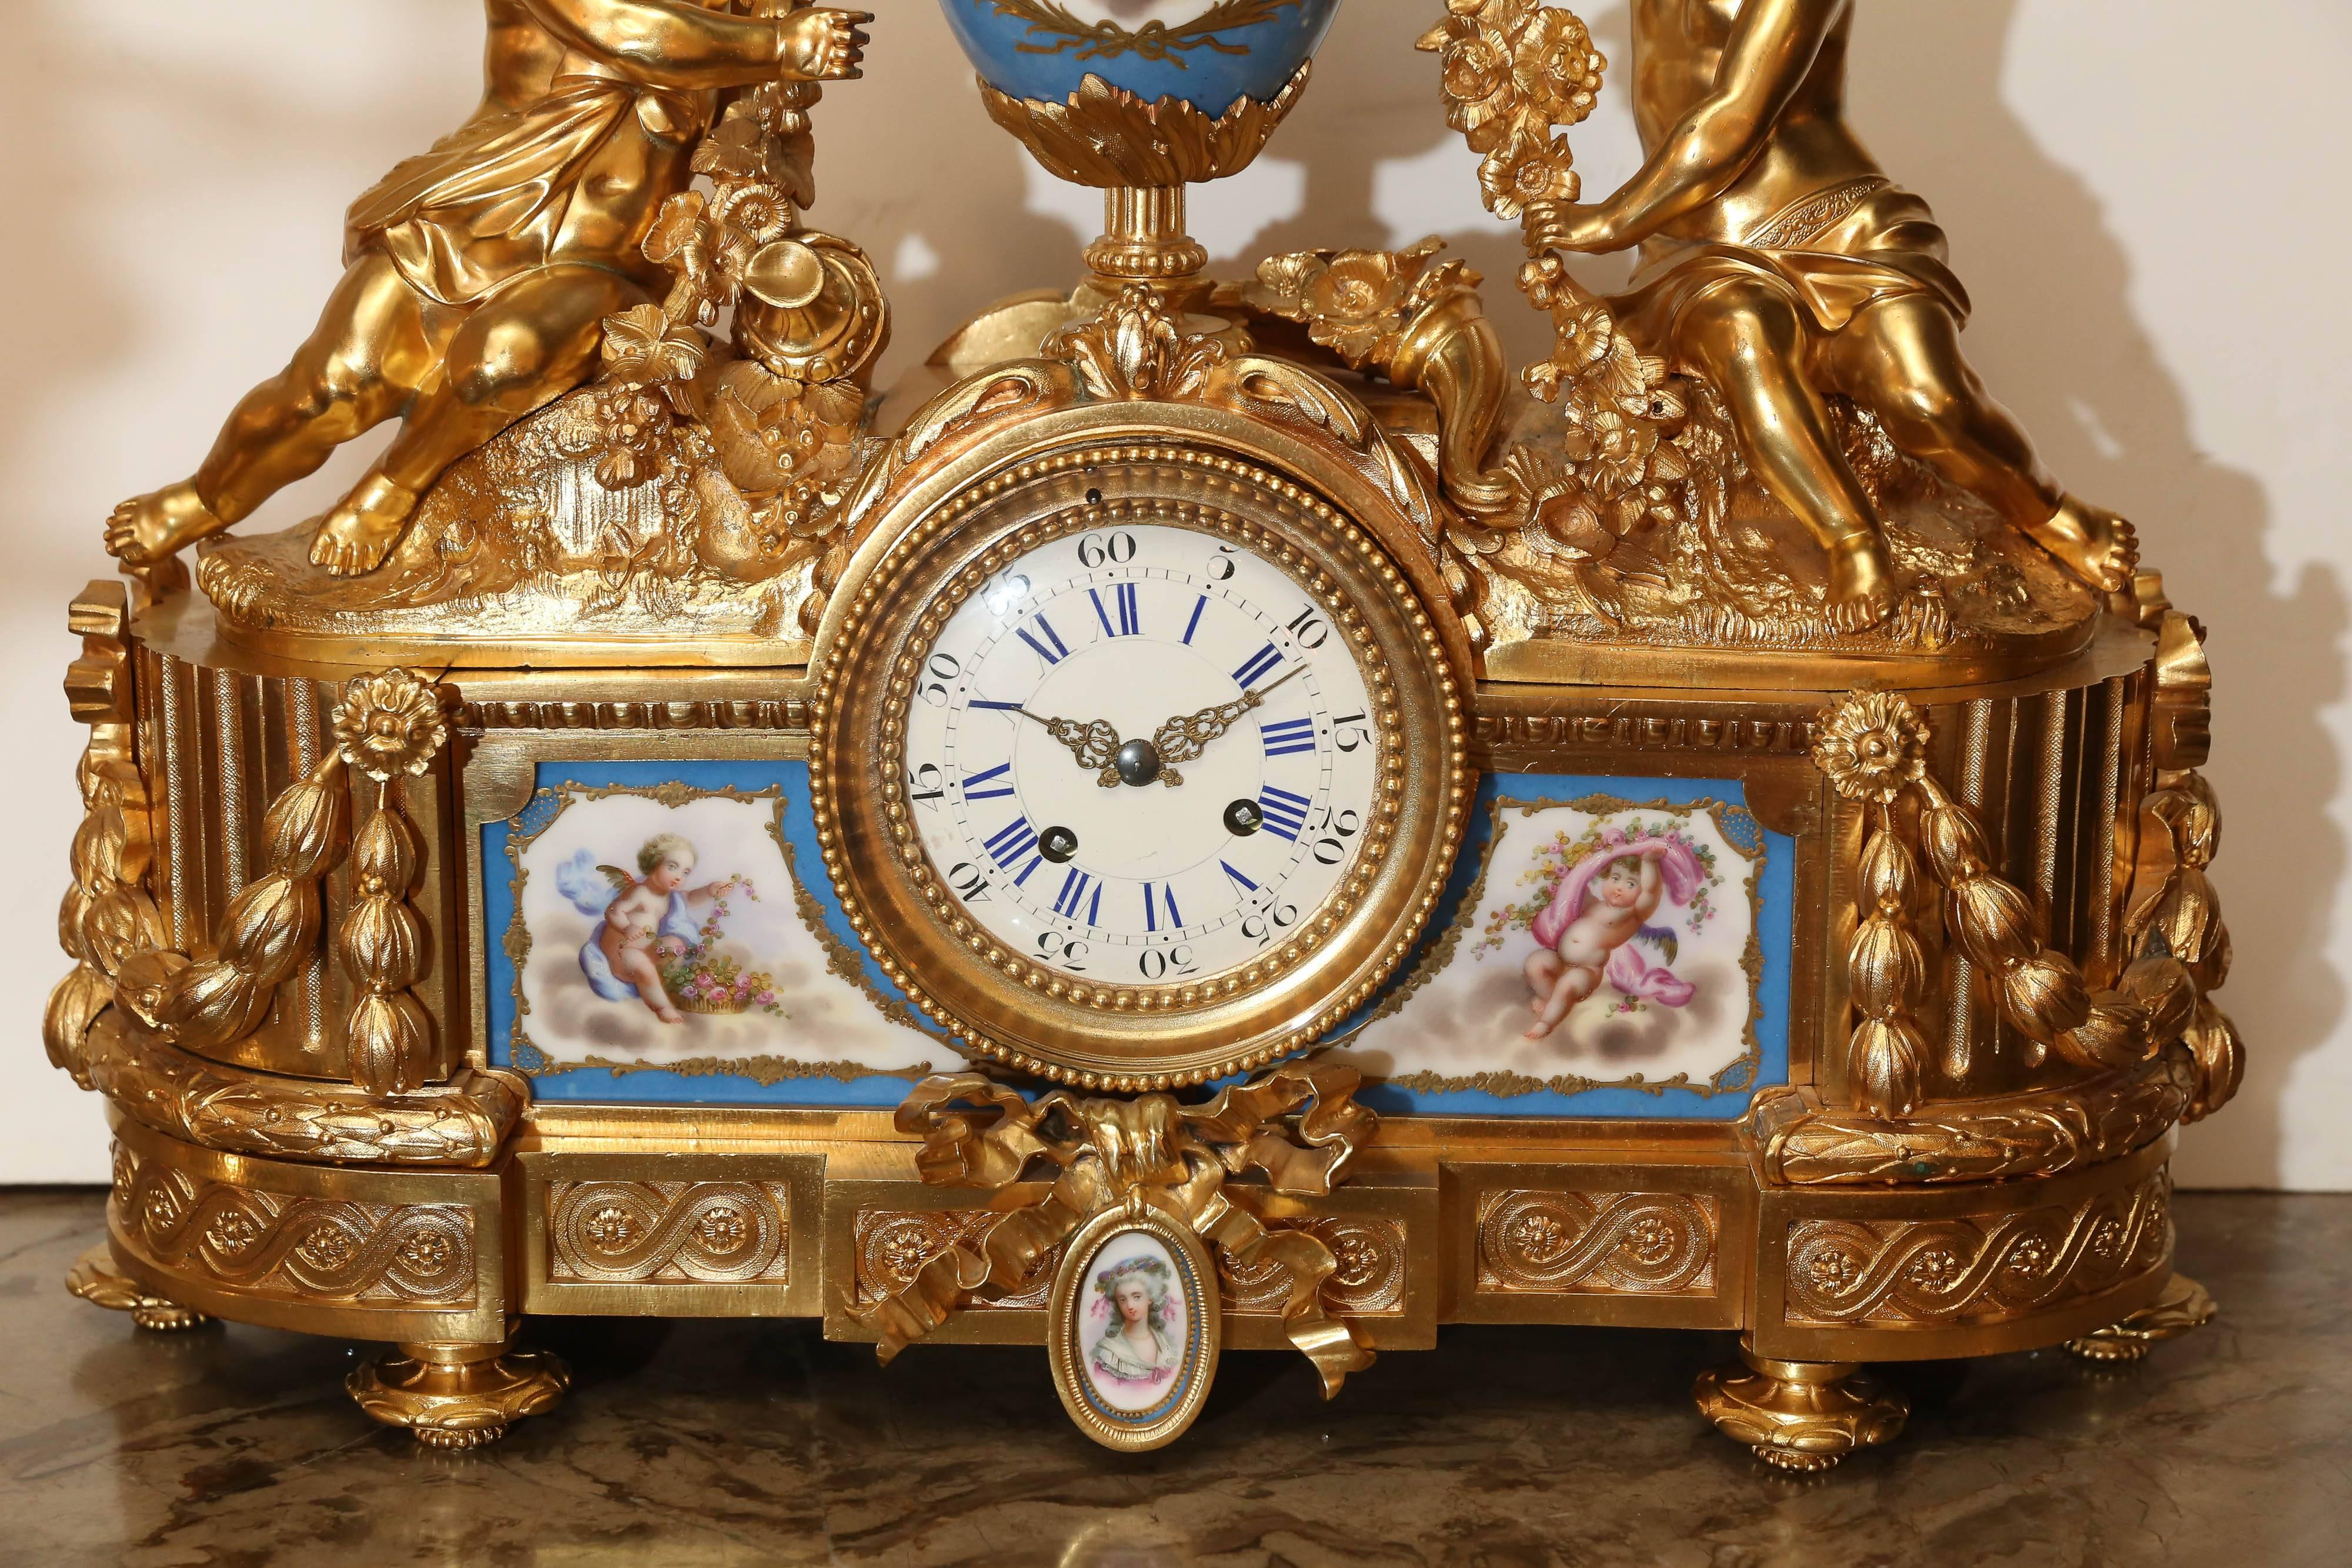 Large and exquisite bronze doré clock with large putti holding a garland
of flowers over a porcelain painted mounted above French clock.